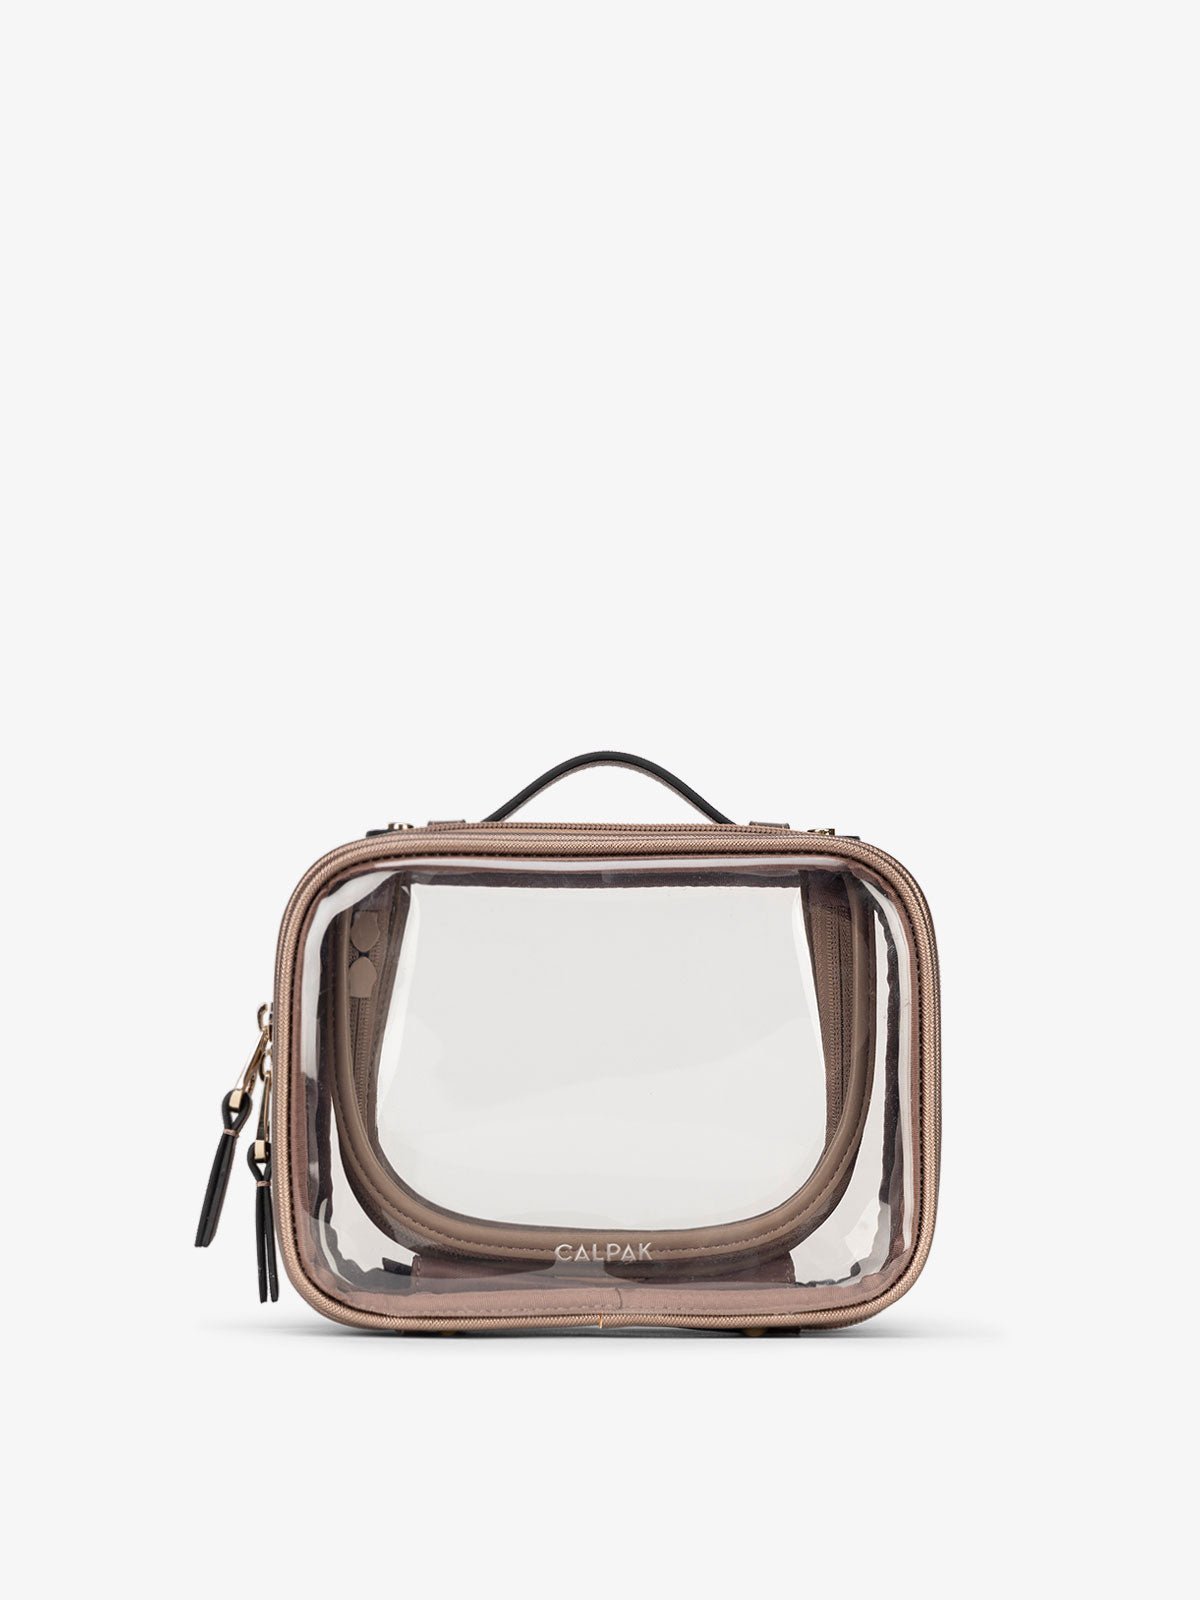 CALPAK small clear makeup bag with zippered compartments in metallic bronze